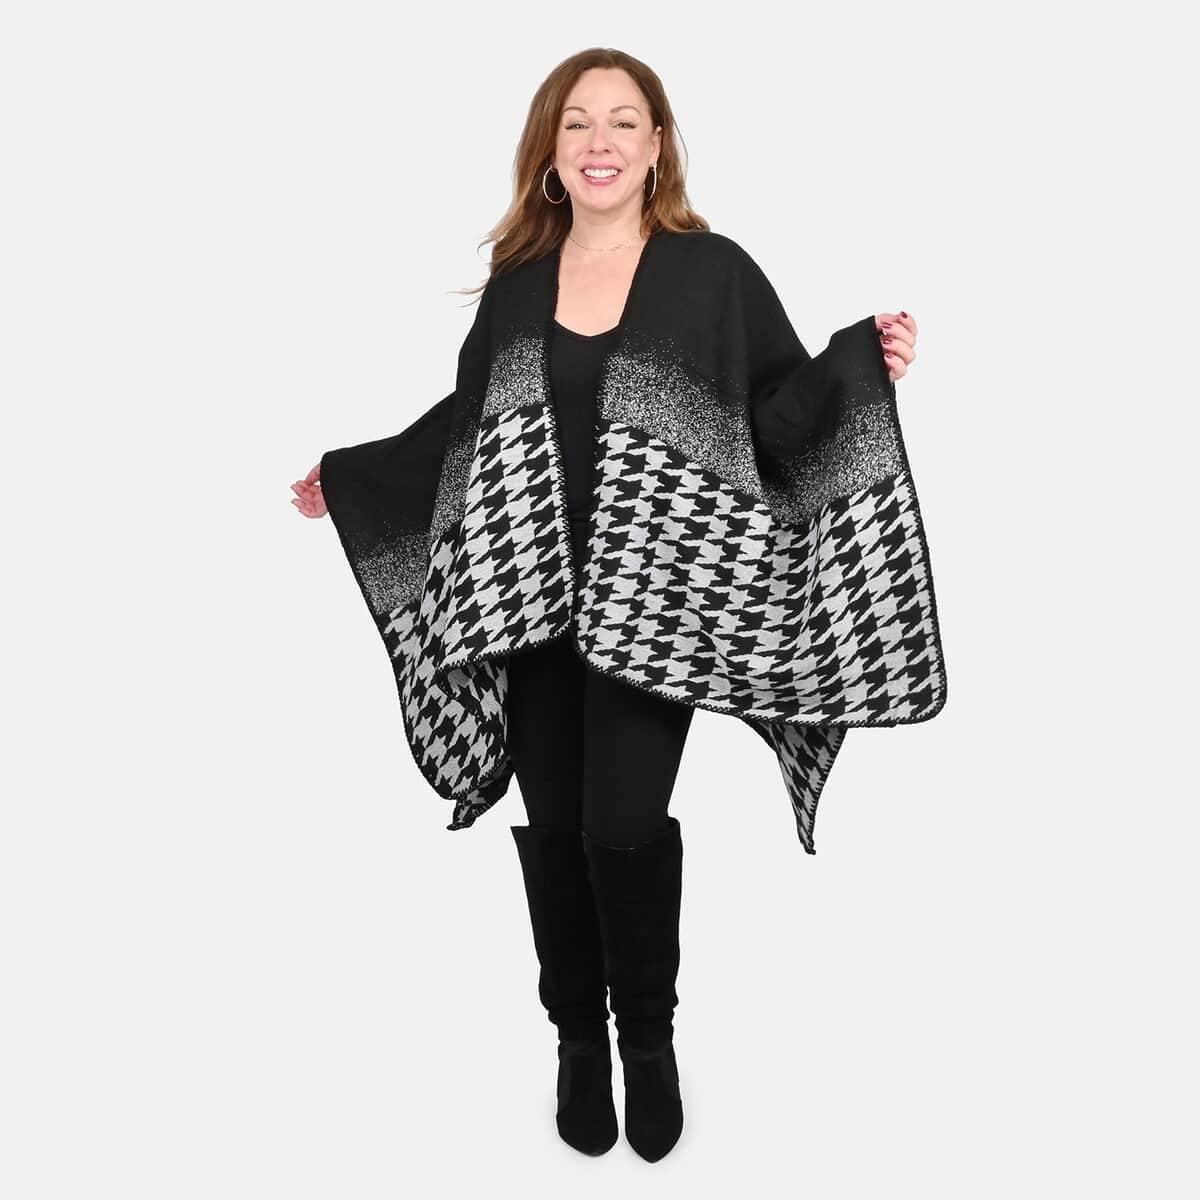 Tamsy Black Houndstooth Reversible Kimono - One Size Fits Most image number 0